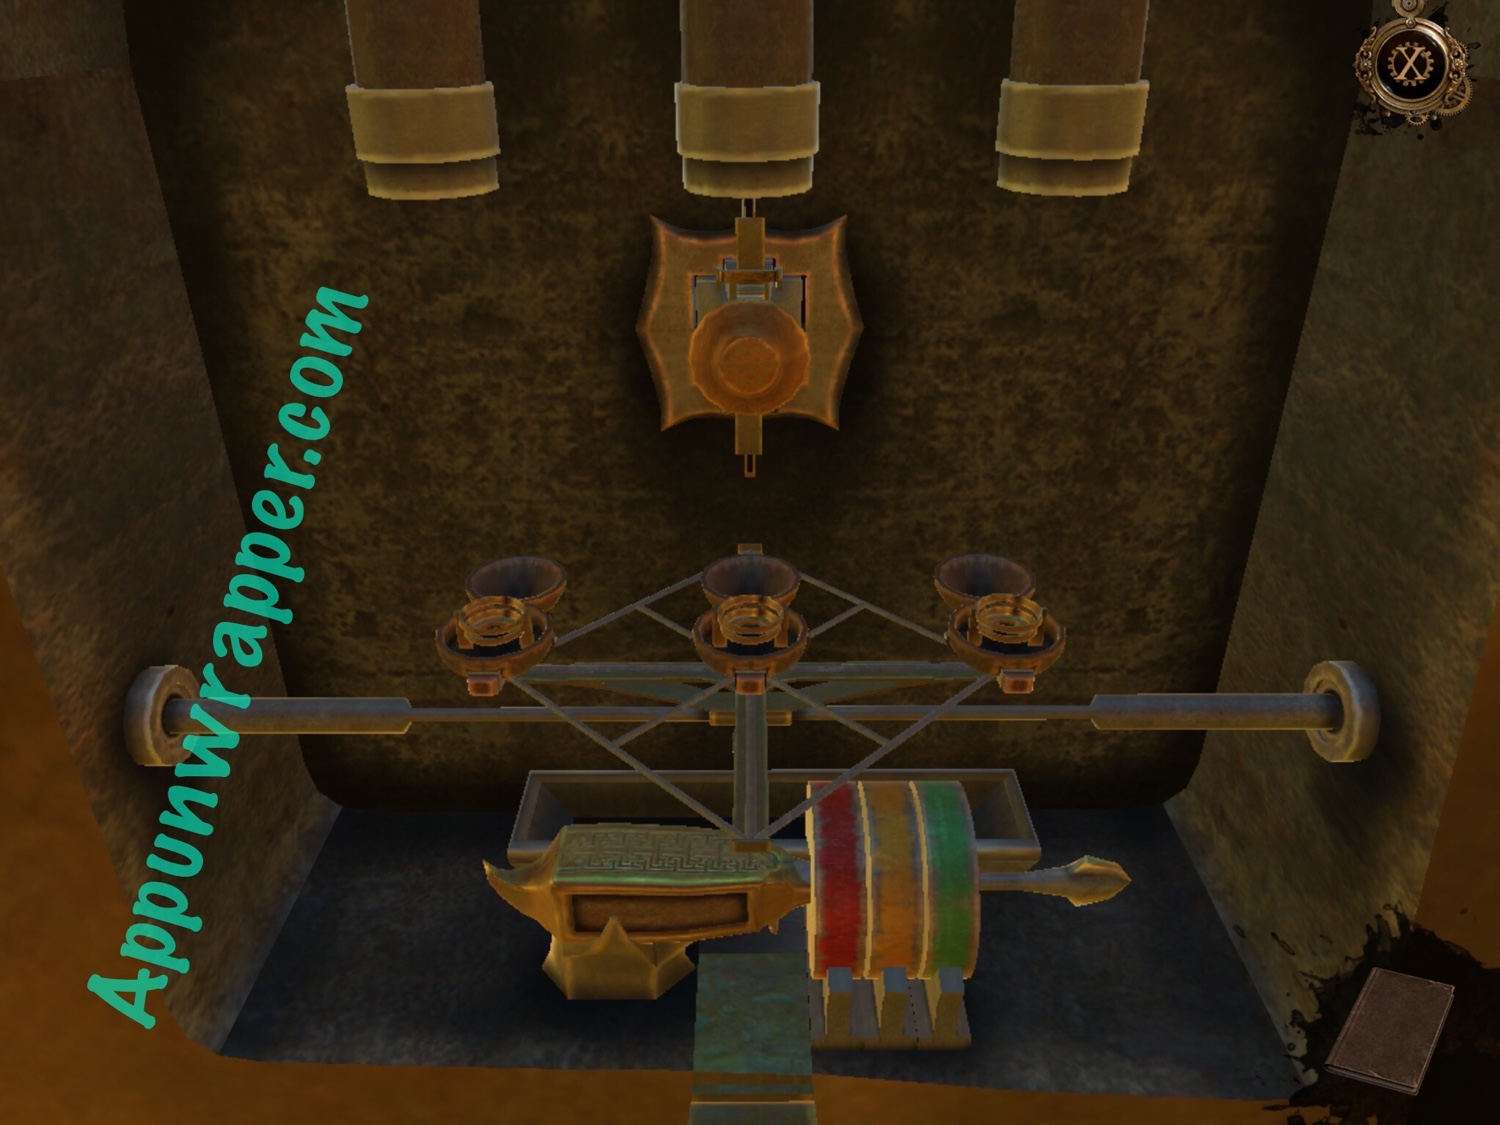 download blue brain games the house of da vinci 3 for free